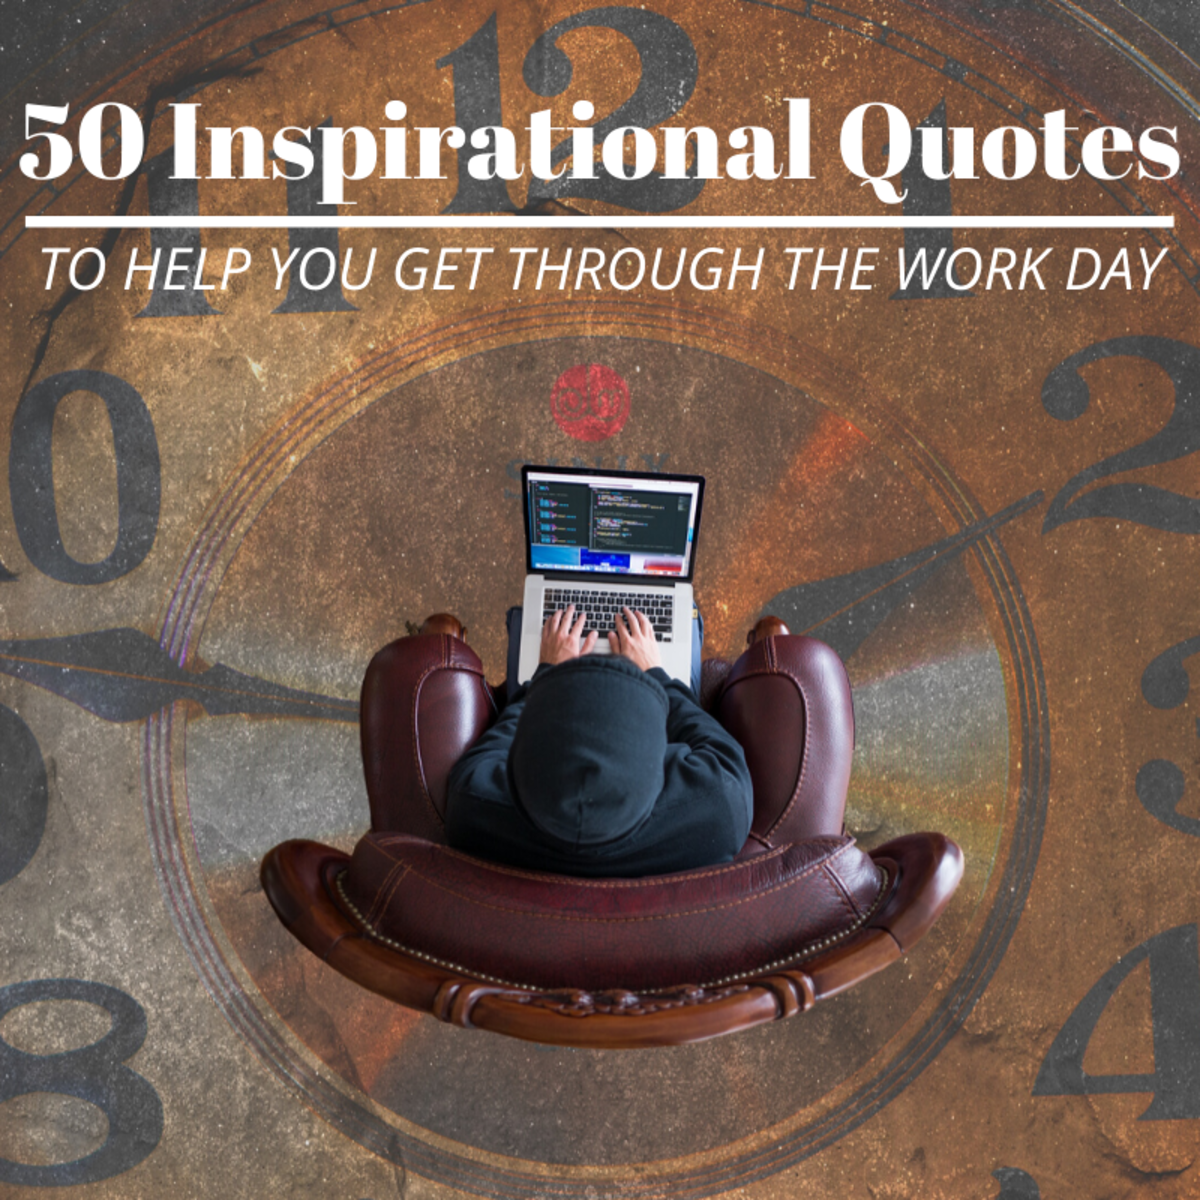 50+ Inspirational Quotes to Help You Get Through Your Work Day